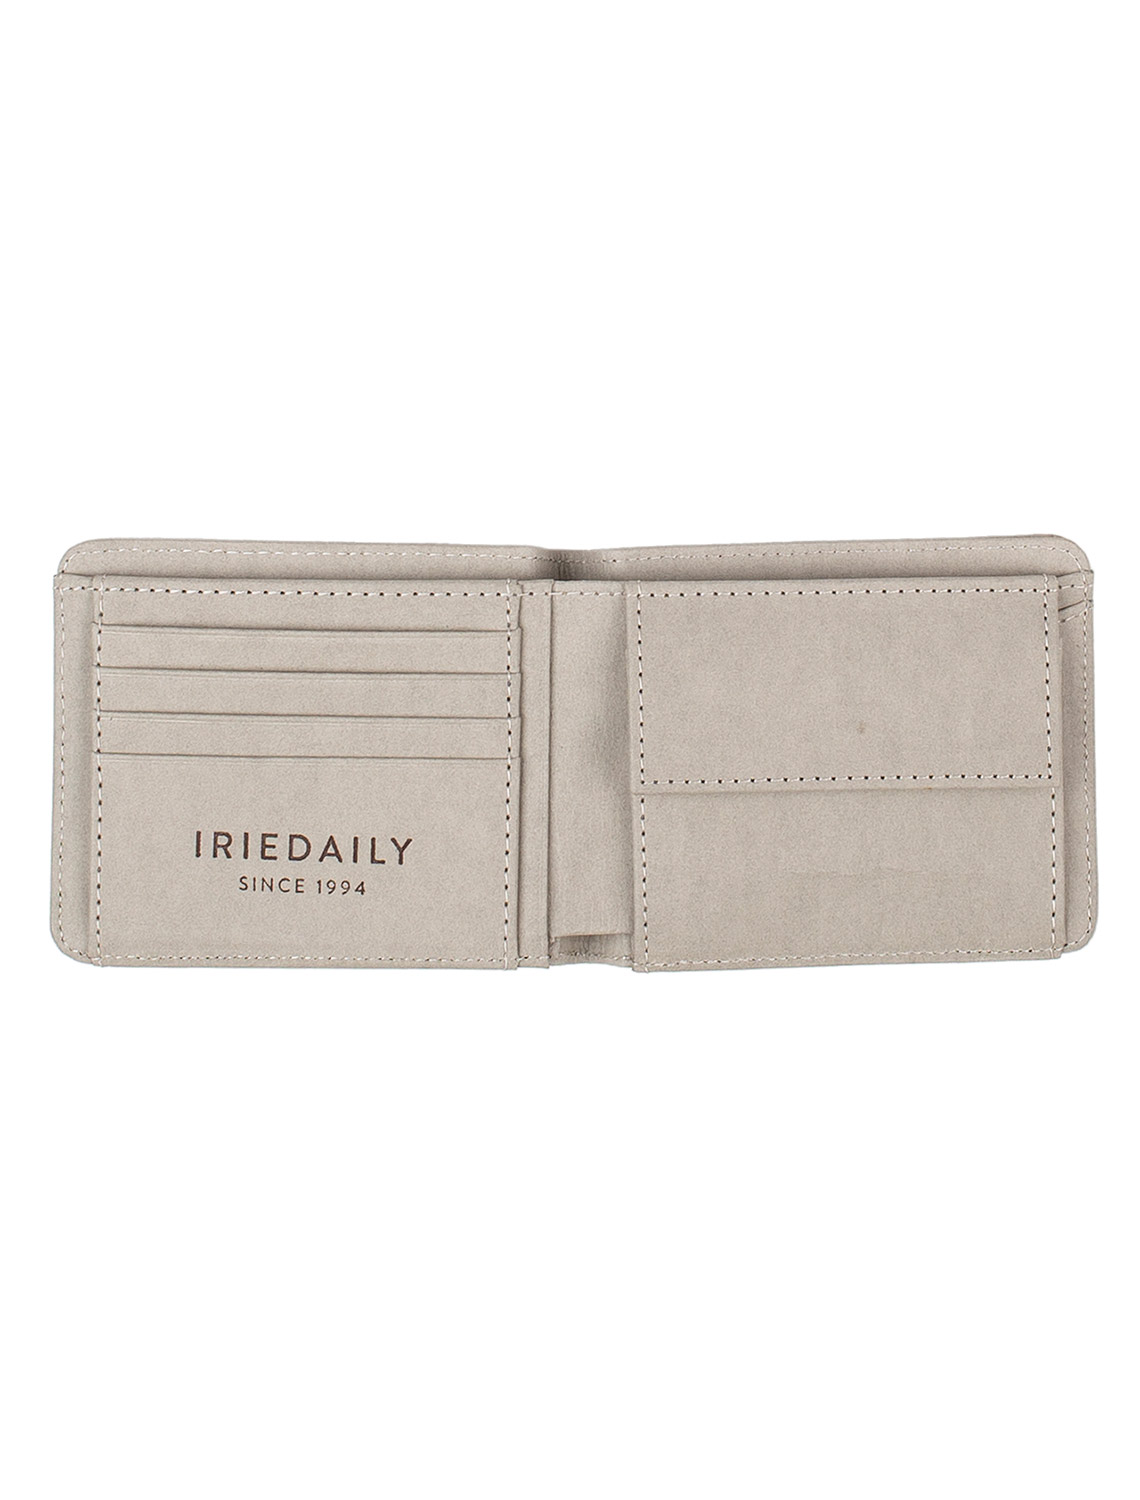 Iriedaily Paper Flag Wallet in Stone Grey